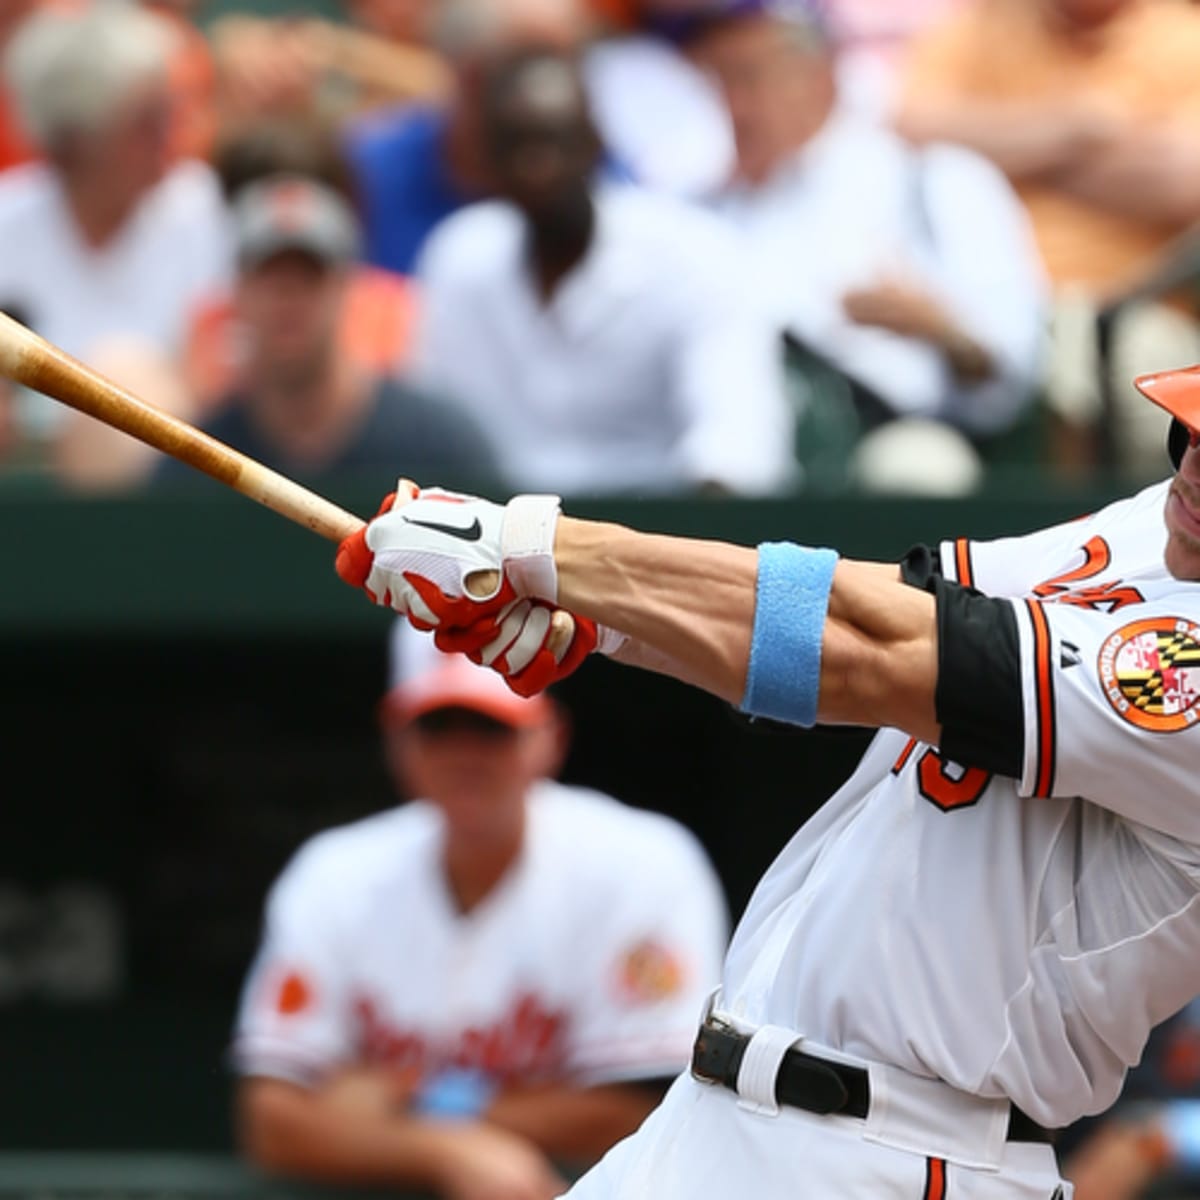 Orioles' left-handed bats hoping to continue forcing tough roster decision